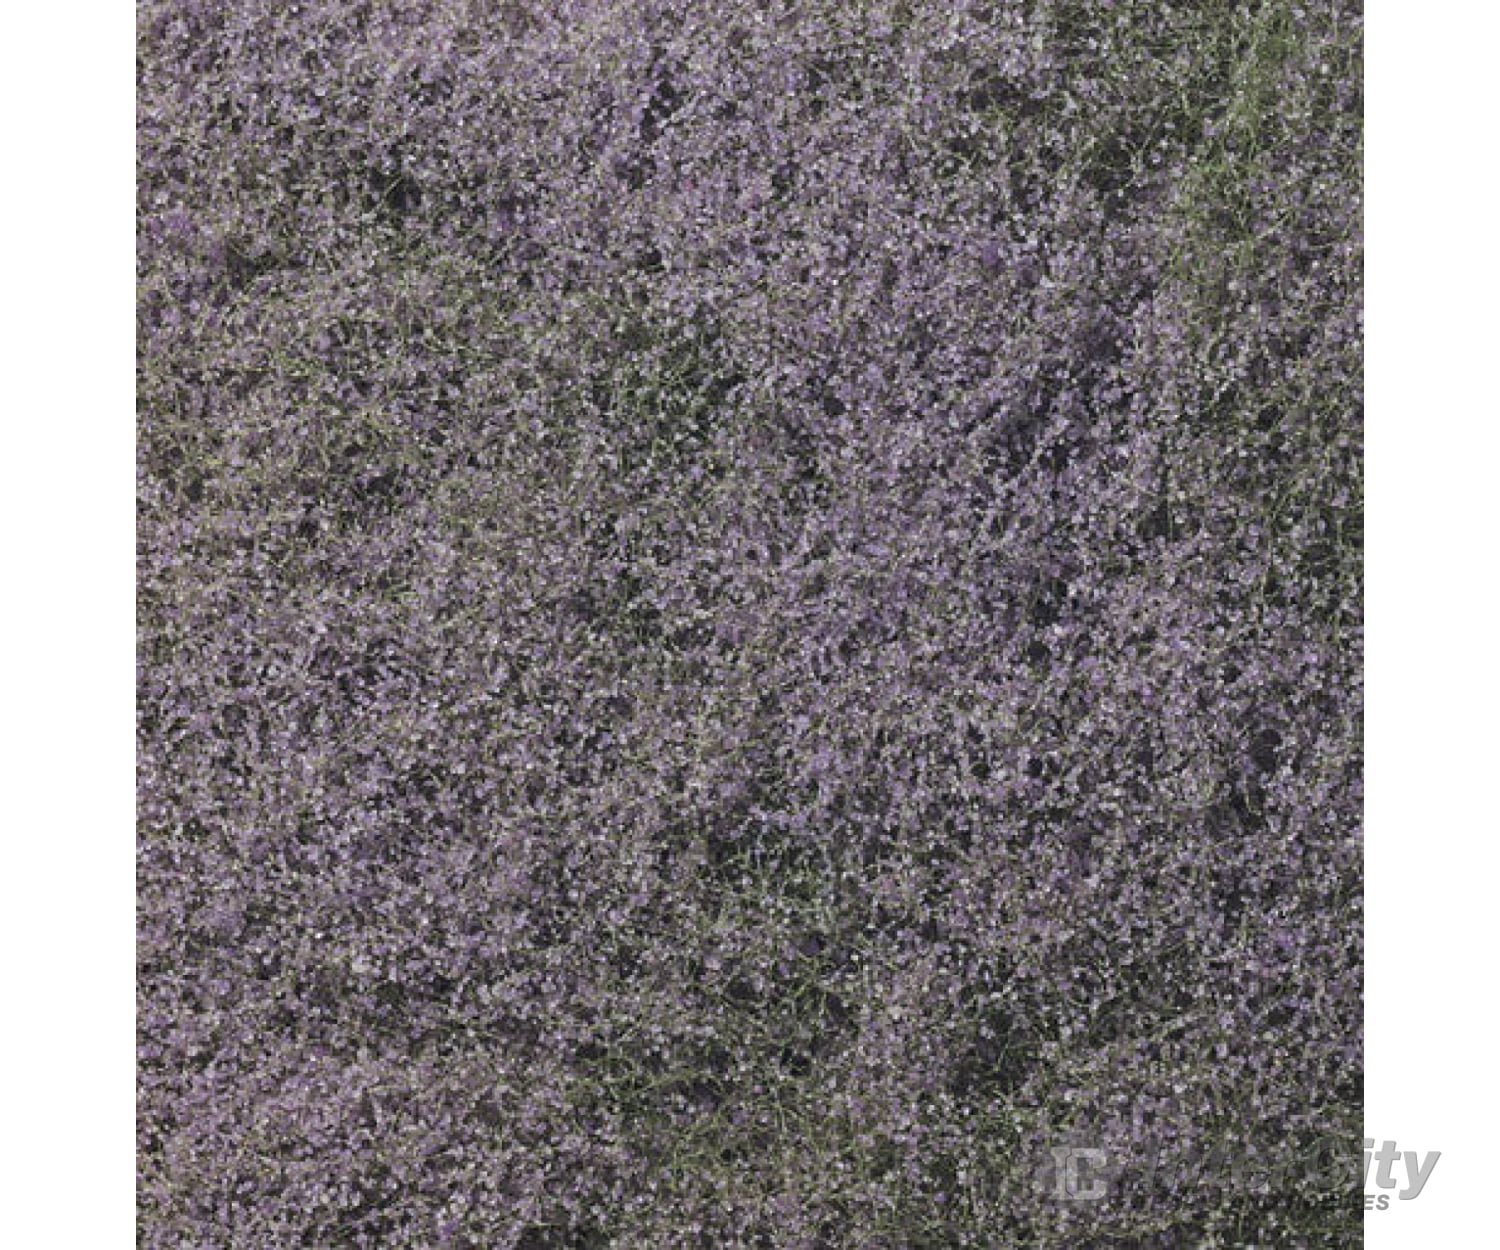 Woodland Scenics 177 Flower Foliage - Pur (Covers 100 Sq.in.) Flock & Turf